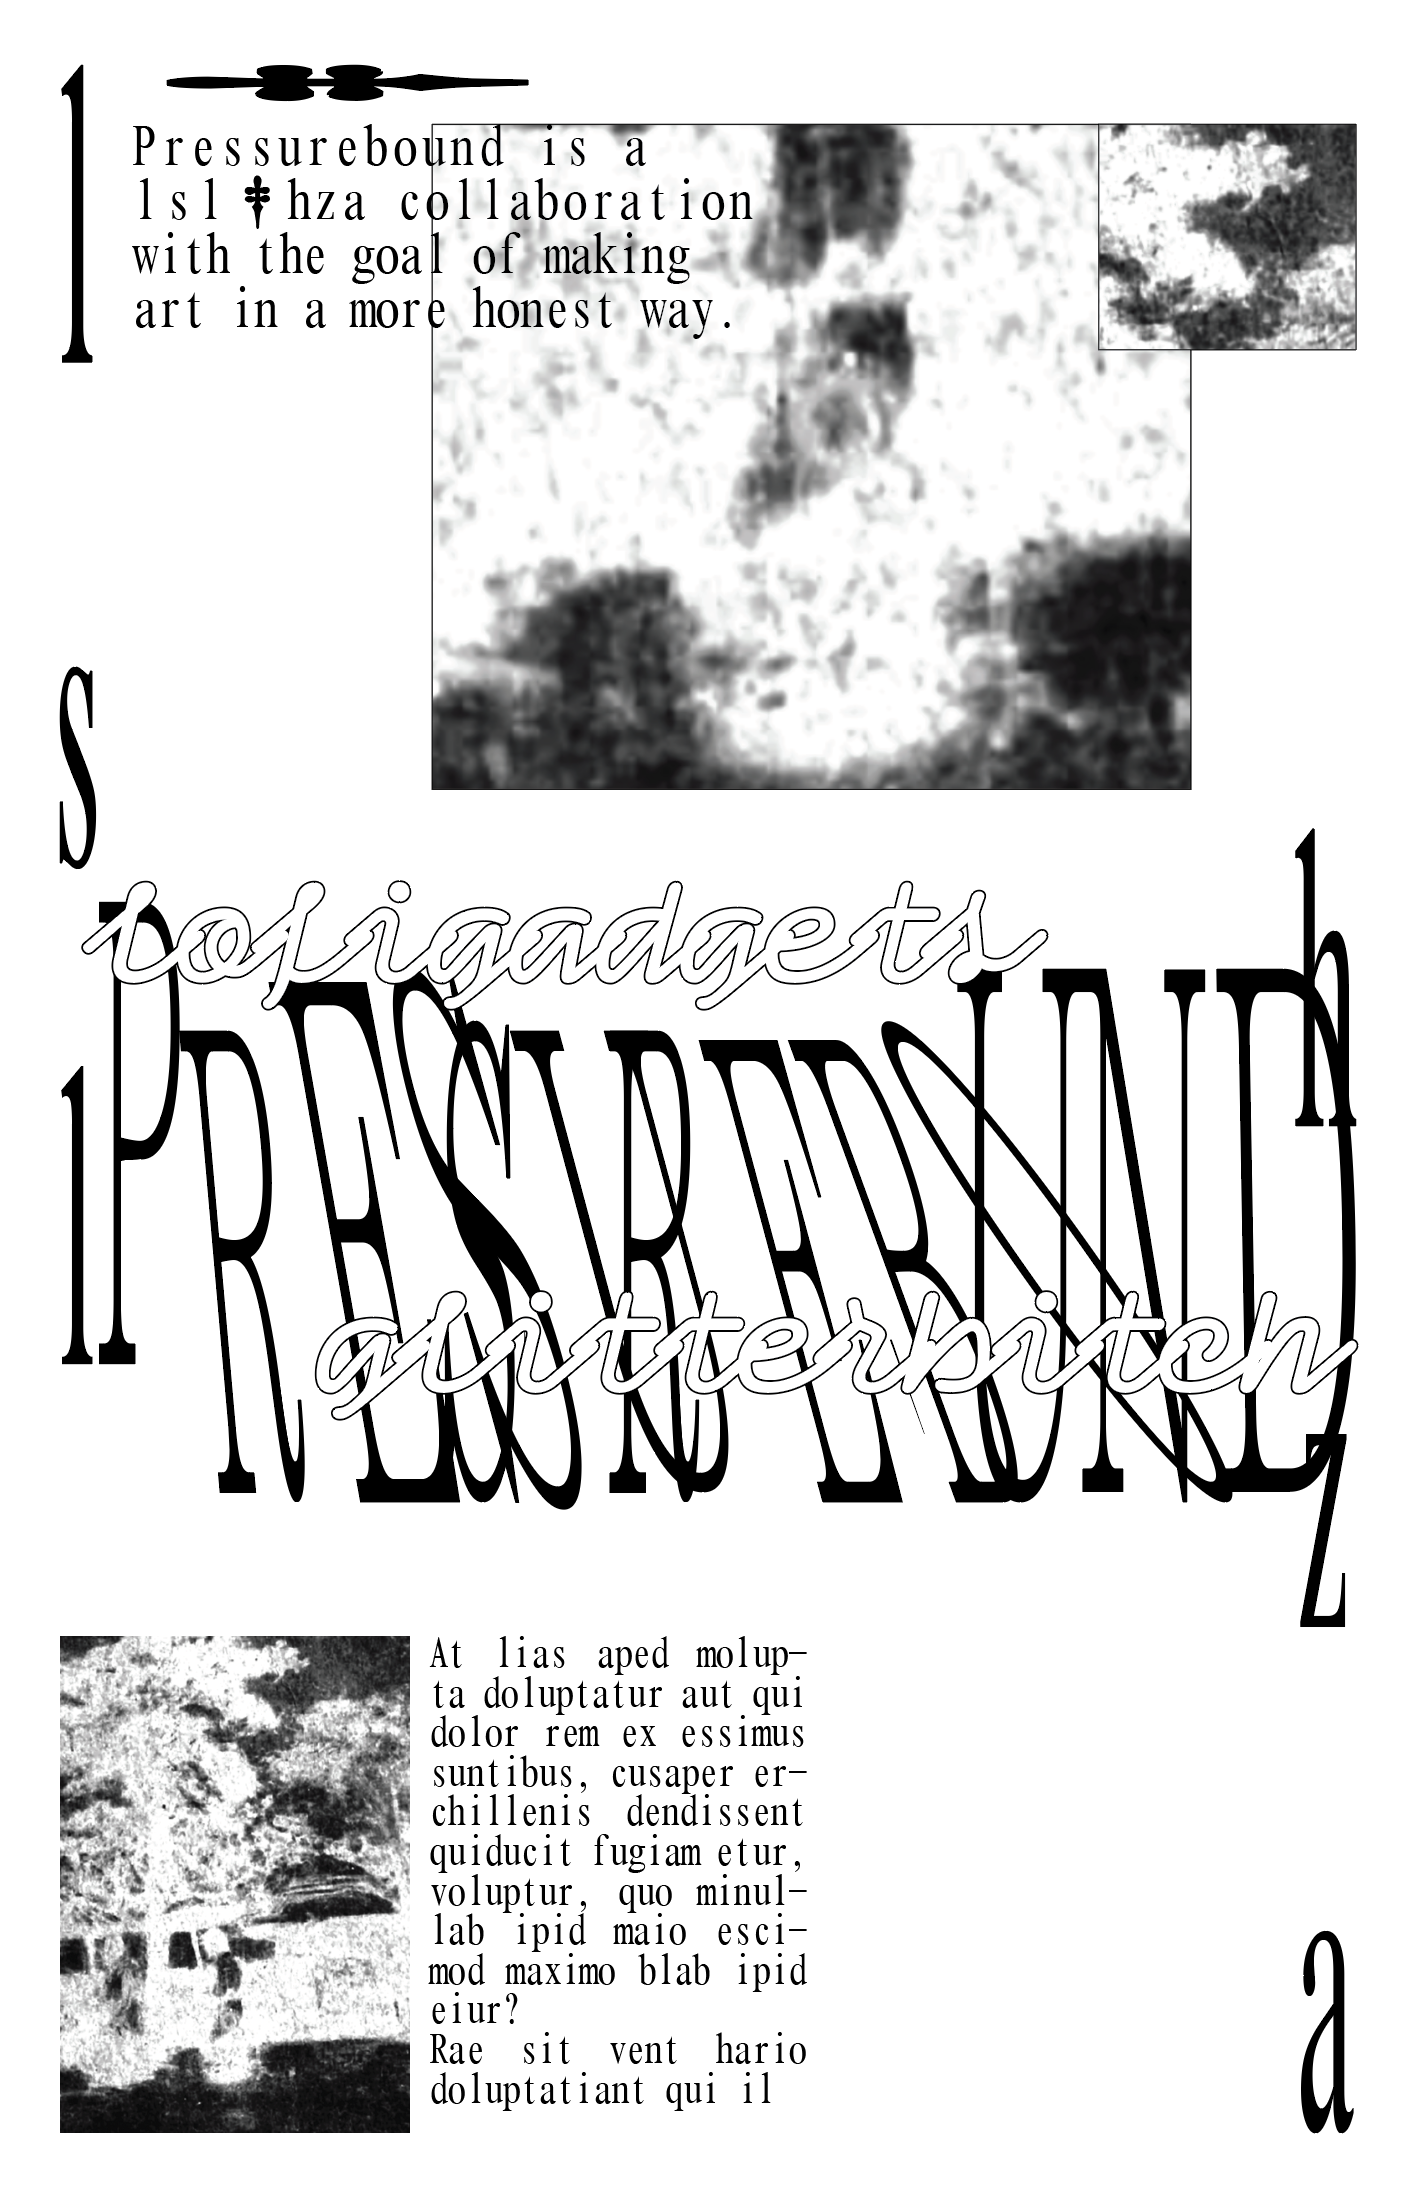 Screenshot of a draft of a poster, in black text/images on a white background. 'PRESSUREBOUND' stretched tall and narrow, positioned in the center of the composition, with some letters slanted to the left and right, intersecting and overlapping with one another. To its top left and bottom right are 'lsl' and 'hza' respectively, similarly stretched thin and long. At its top left and bottom right, 'PRESSUREBOUND' is intertwined with the words 'lofigadgets' and 'glitterbitch', both in a bubbly font. To the top and bottom of the composition are crops of an unidentifiable image and filler text, of which the top left paragraph reads 'Pressurebound is a lsl & hza collaboration with the goal of making art in a more honest way'. (The & is replaced with a dagger symbol.)